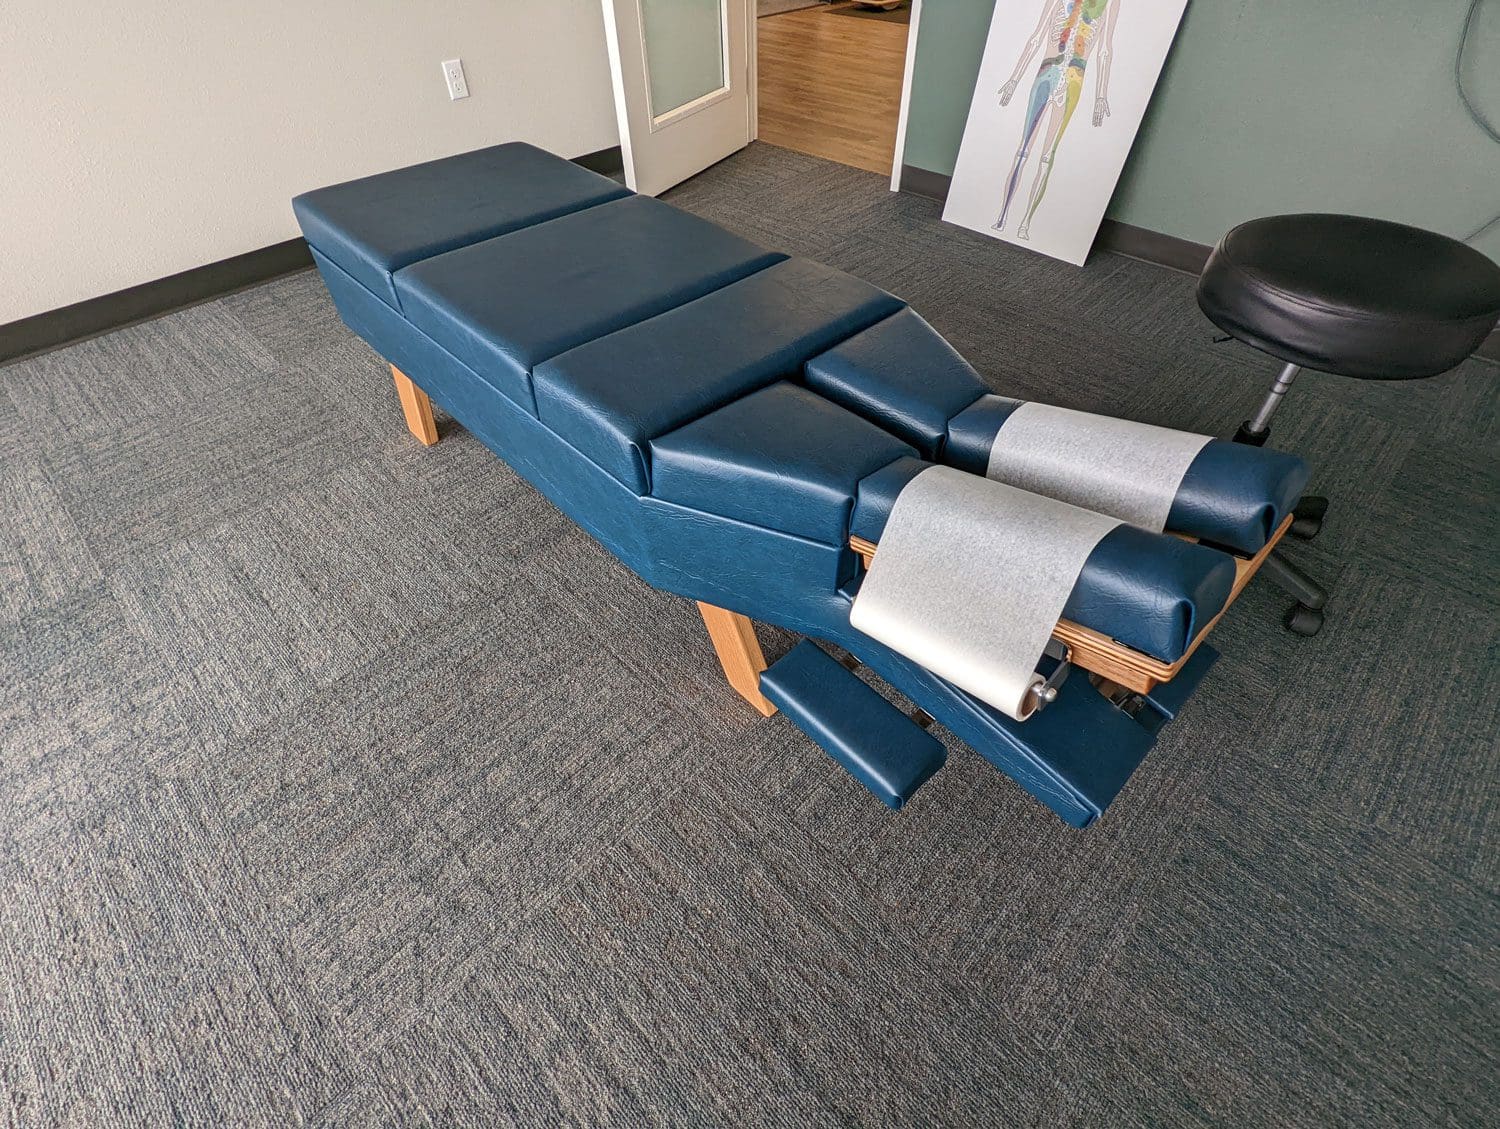 A chiropractic table